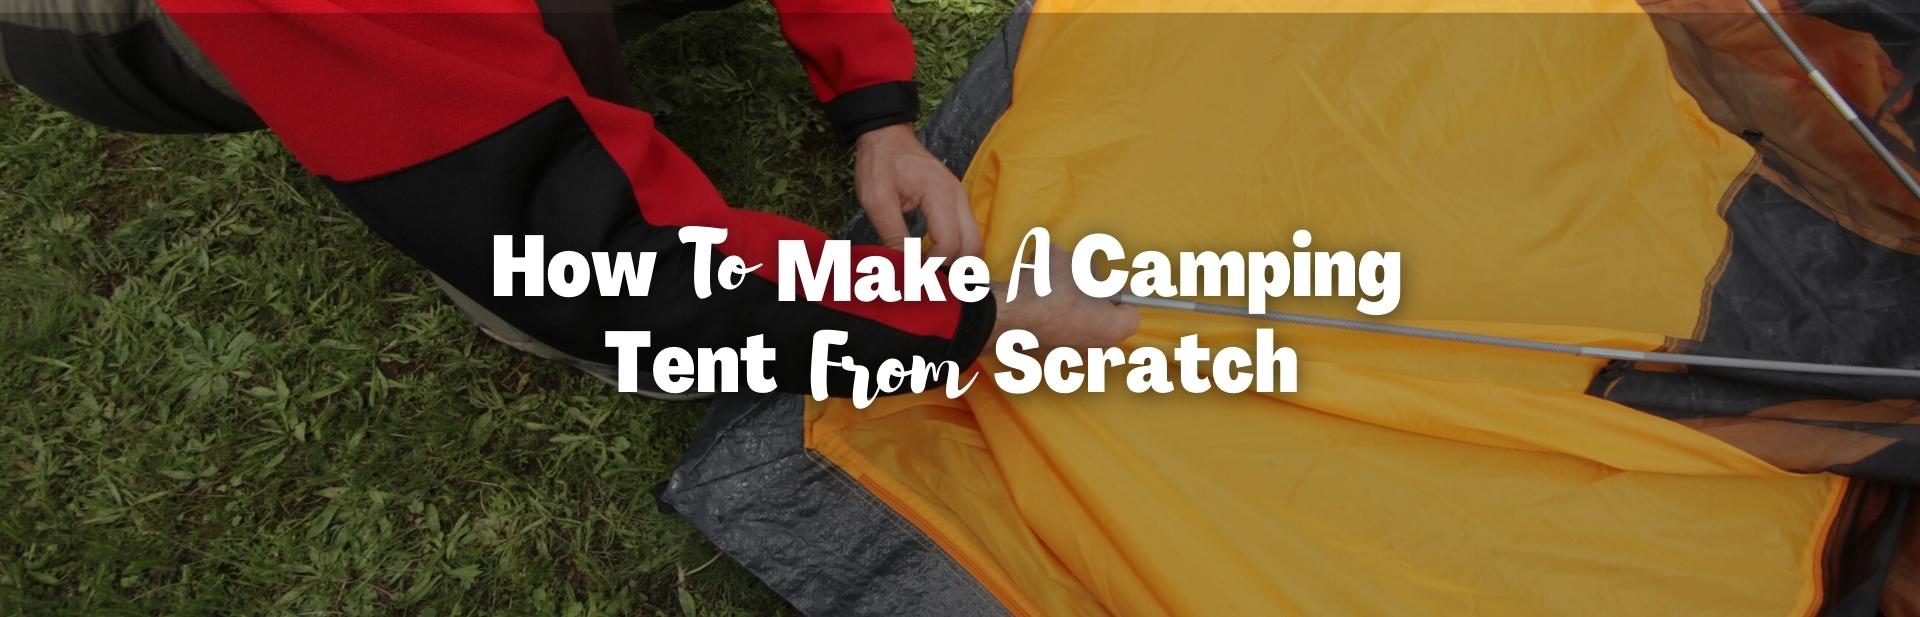 How To Make A Camping Tent From Scratch: An Emergency Shelter, or For Fun